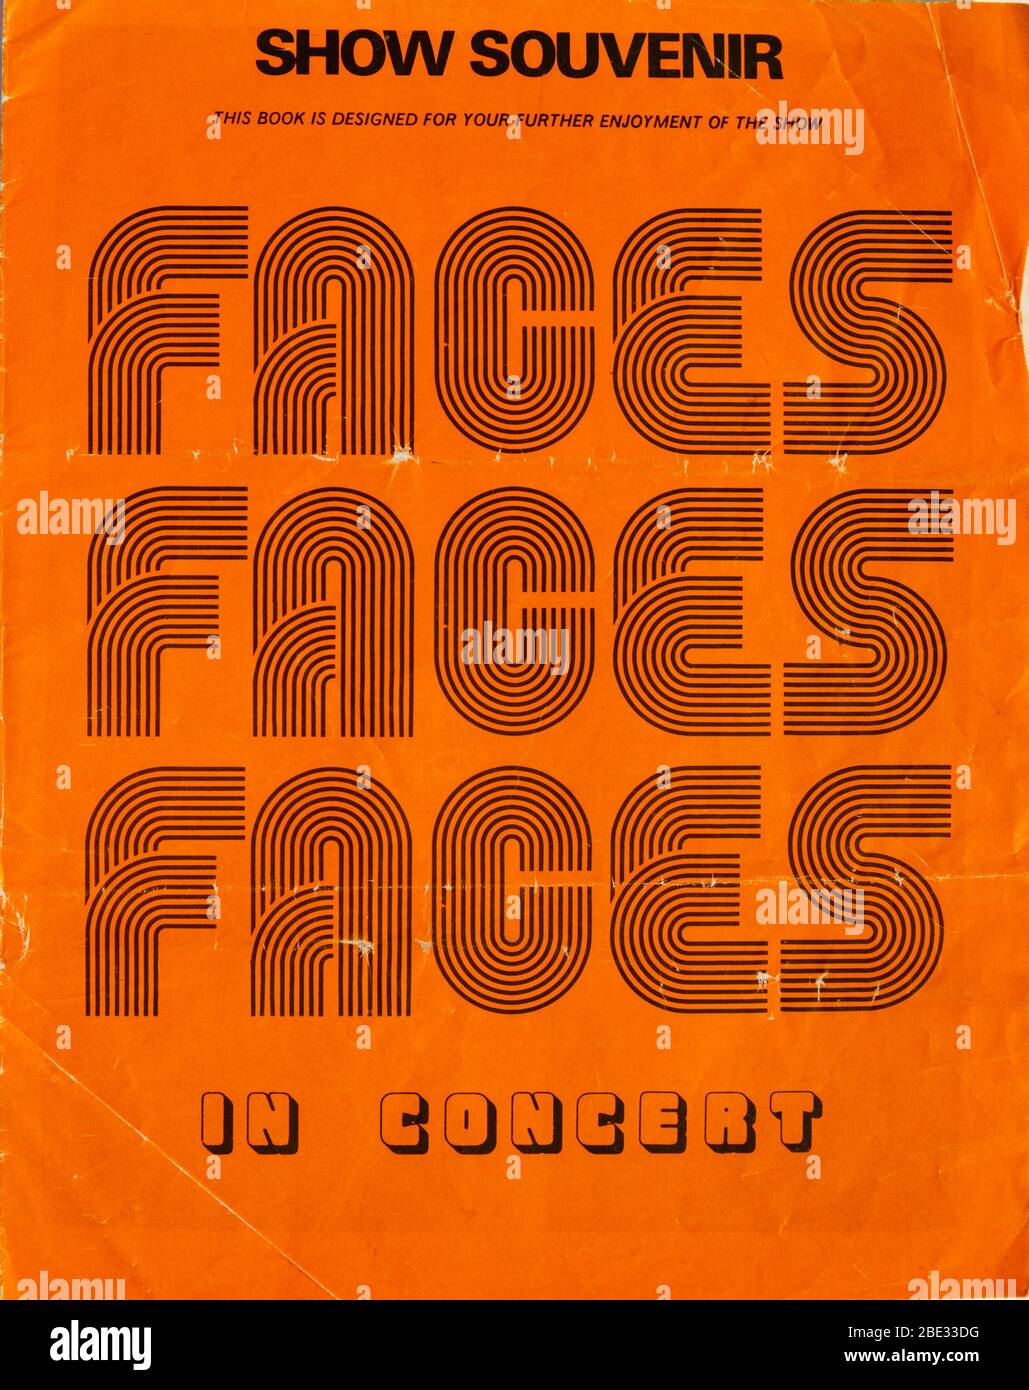 Rod Stewart and the Faces In Concert tour show souvenir program from the 1974 UK tour. Bright orange cover. Stock Photo